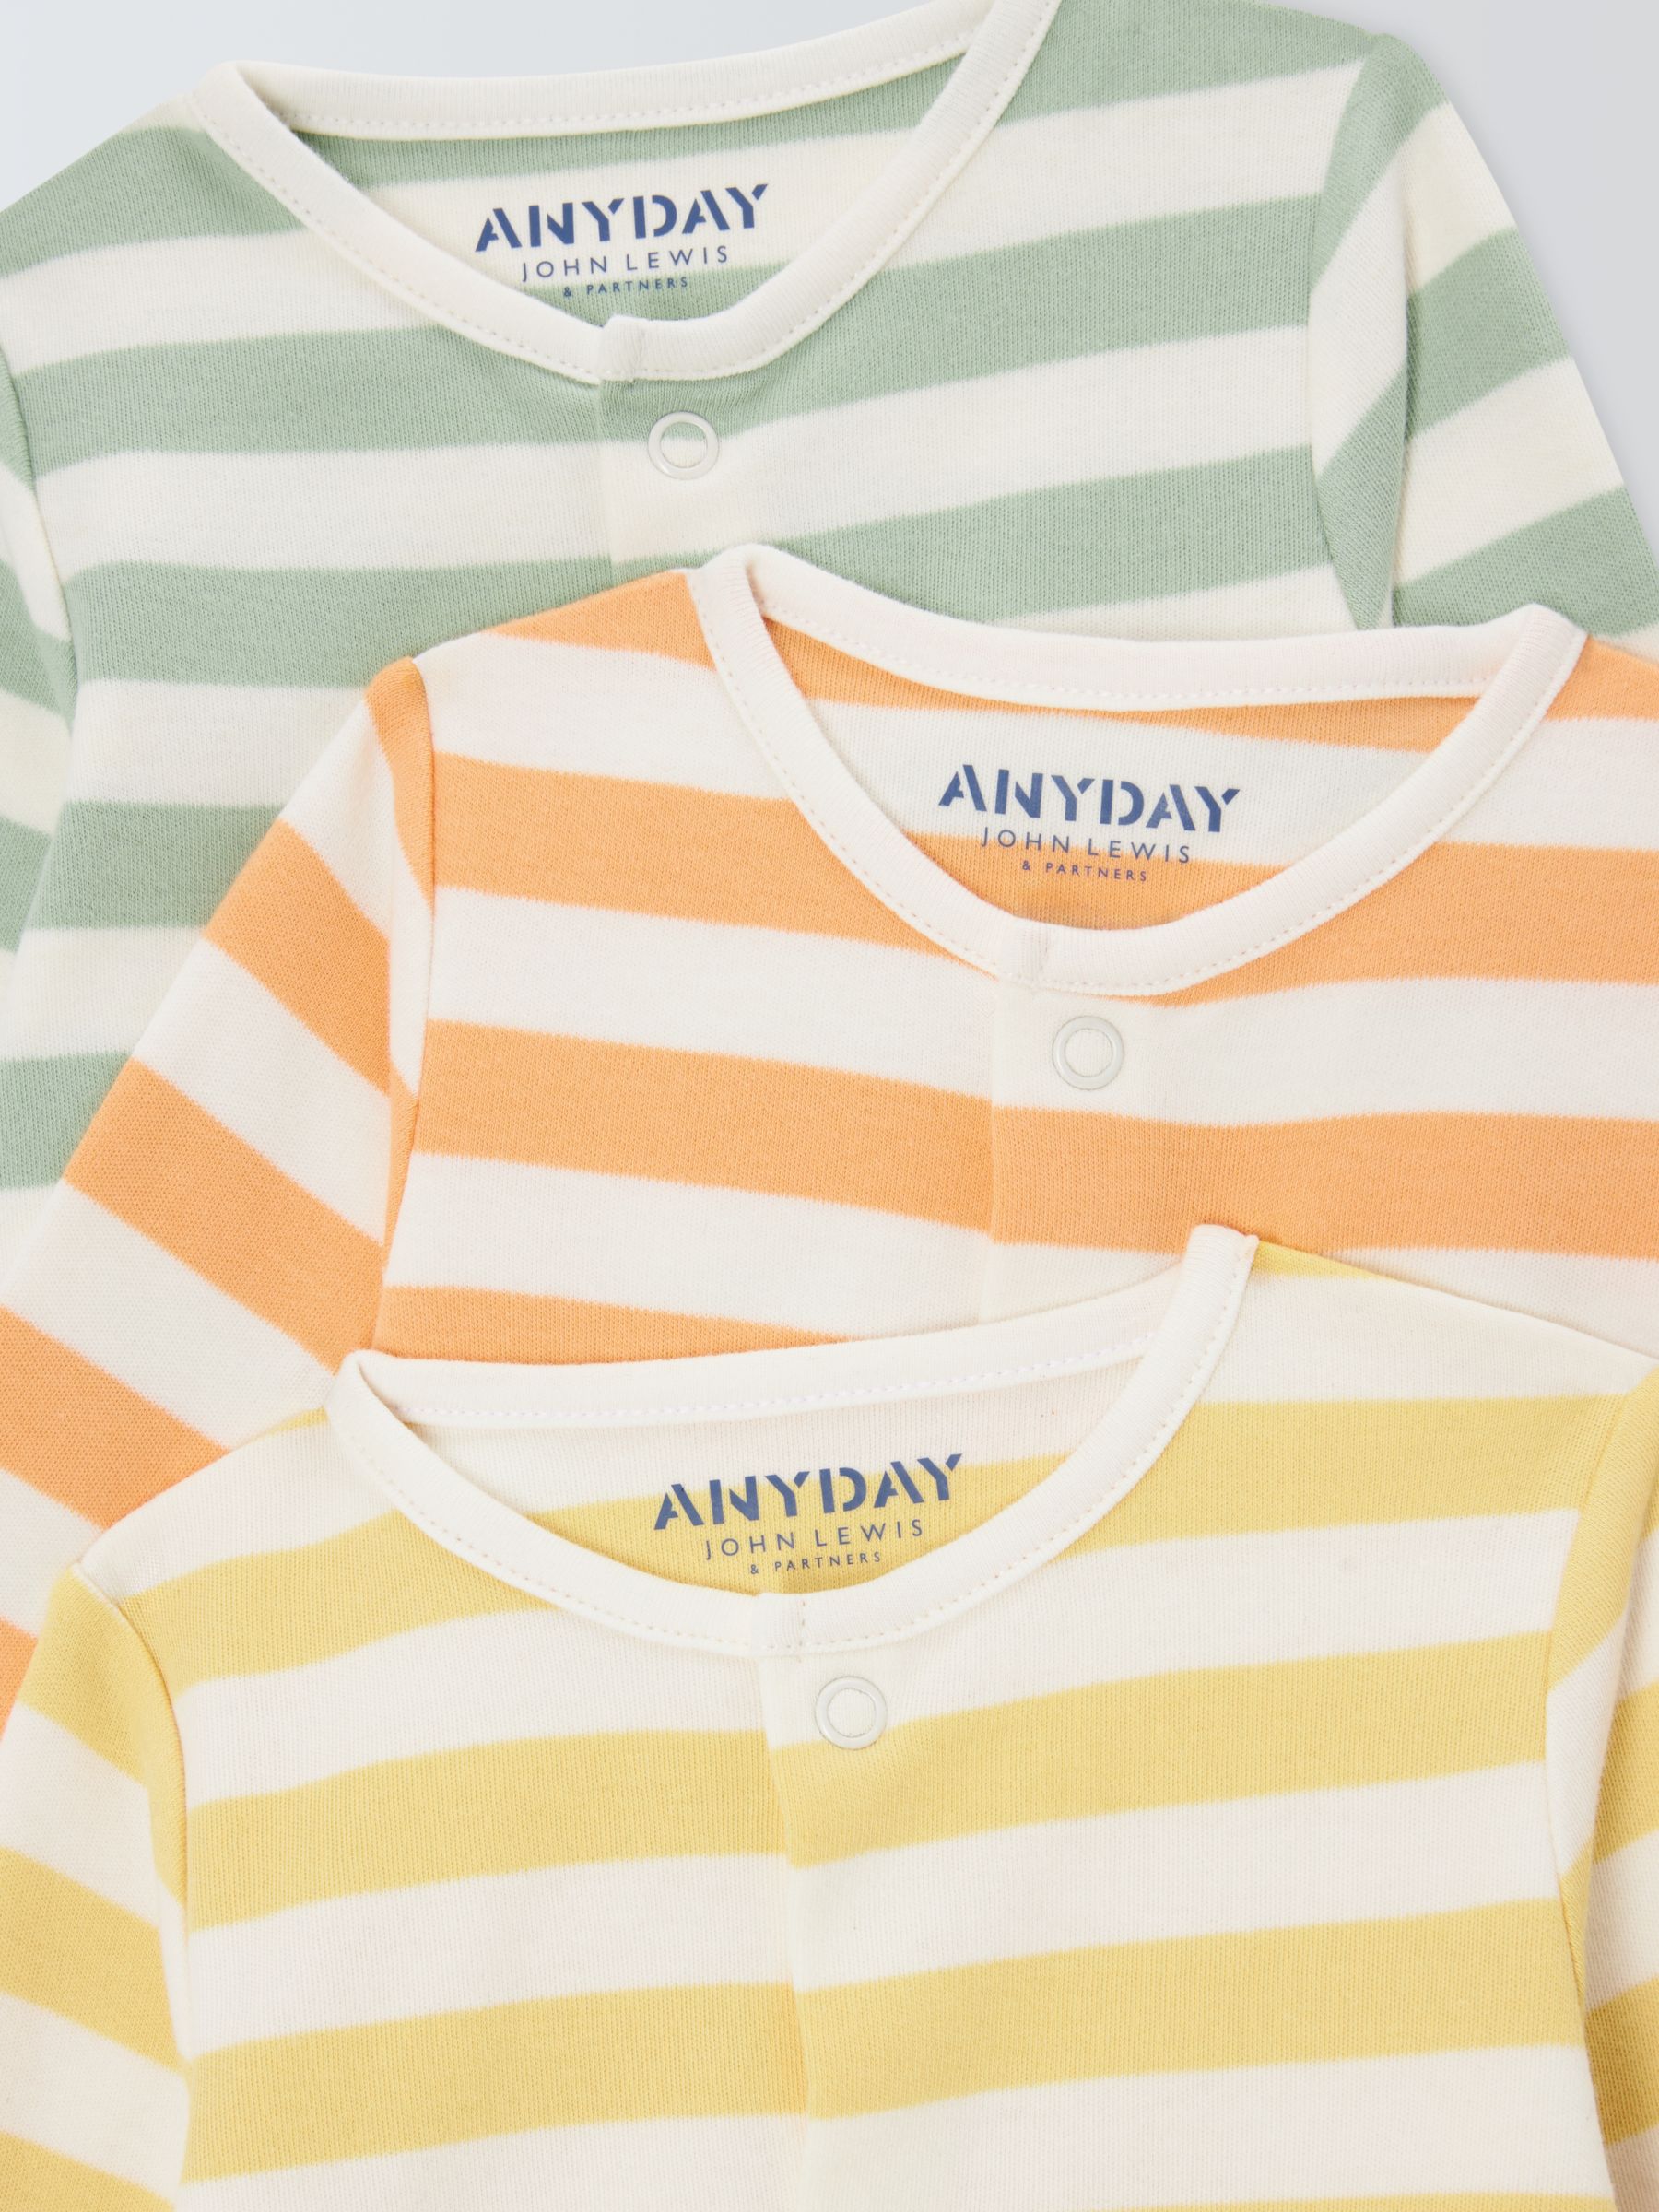 John Lewis ANYDAY Baby Stripe Sleepsuit, Pack of 3, Multi, 6-9 months